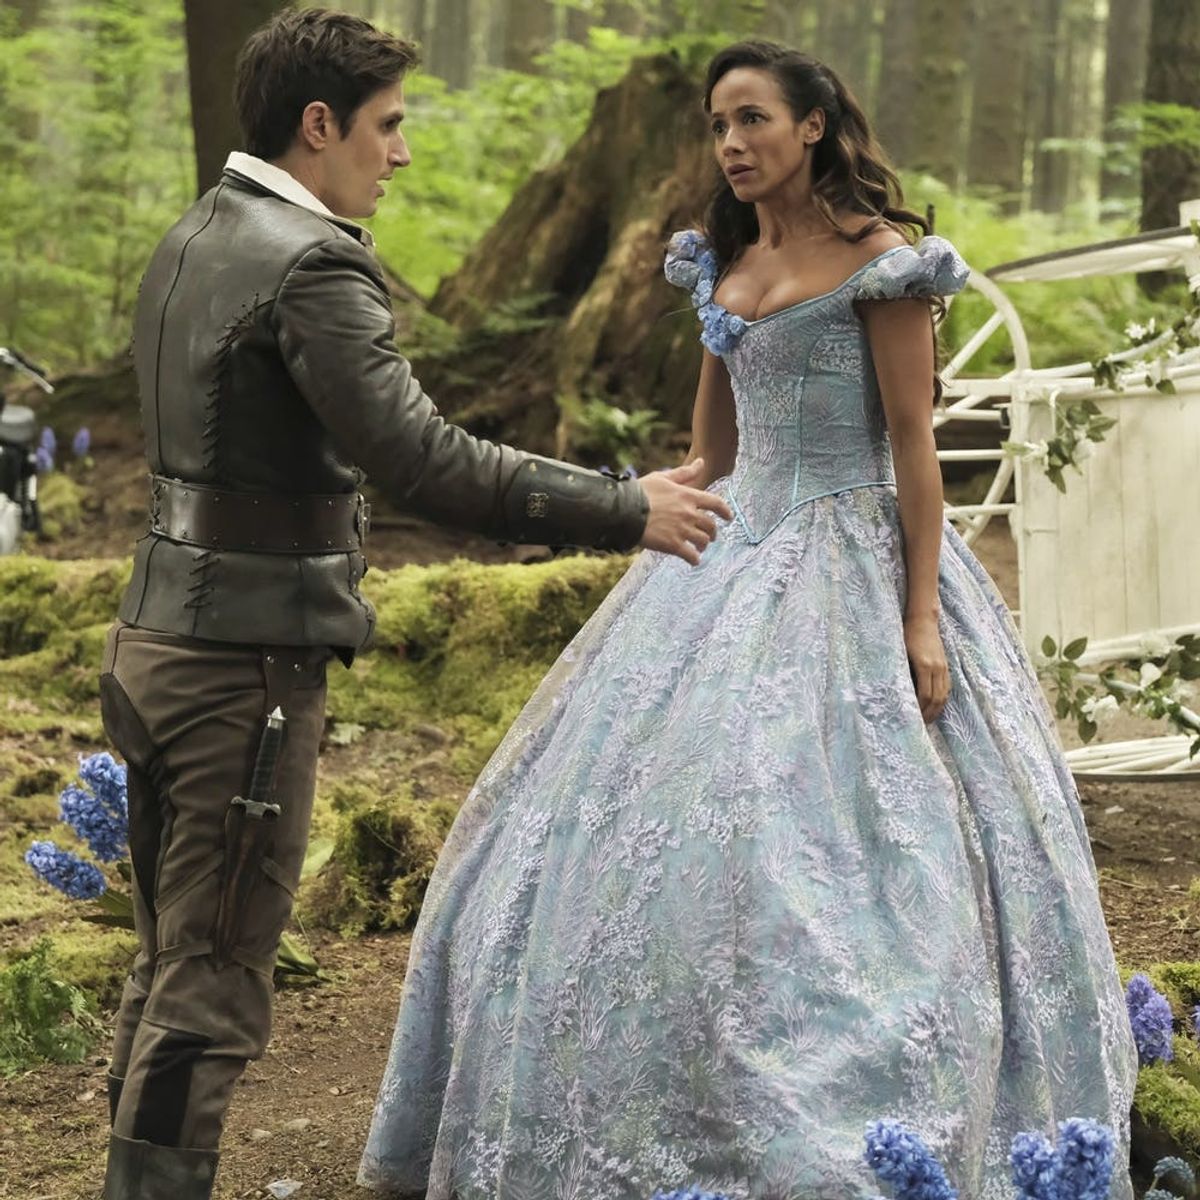 ‘Once Upon a Time’ Ending After Season 7